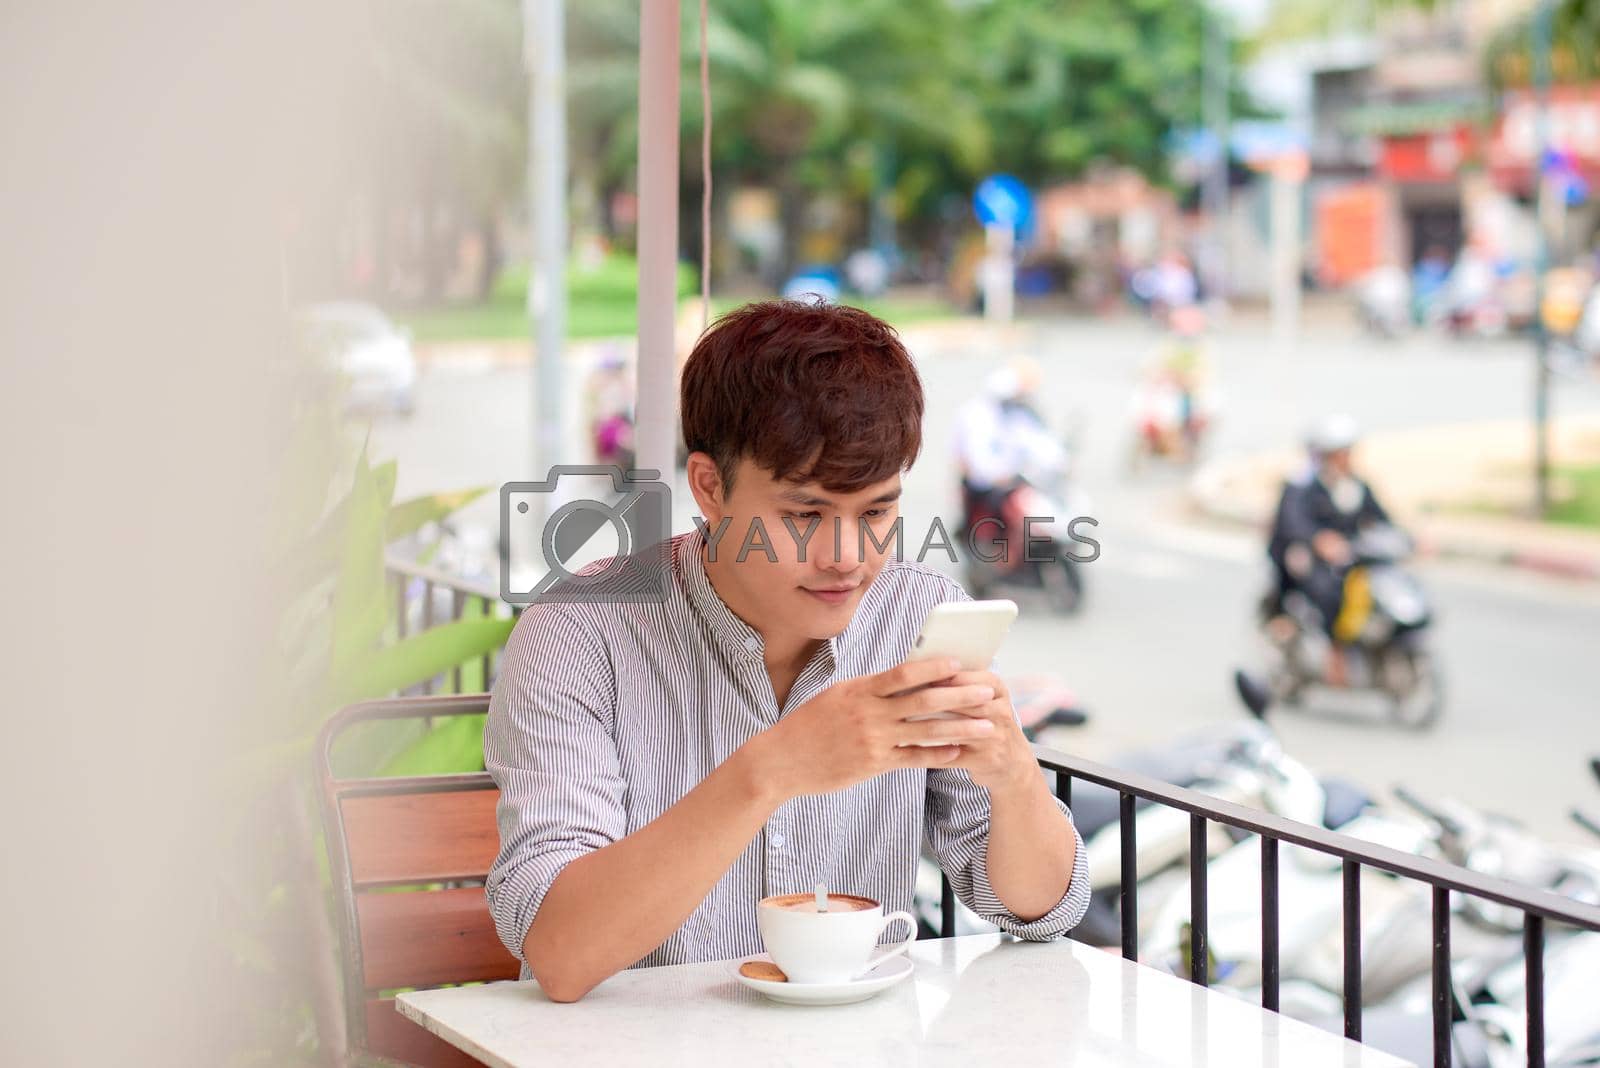 Royalty free image of Young smiling man looking on the phone or reading message in cafe outdoor by makidotvn